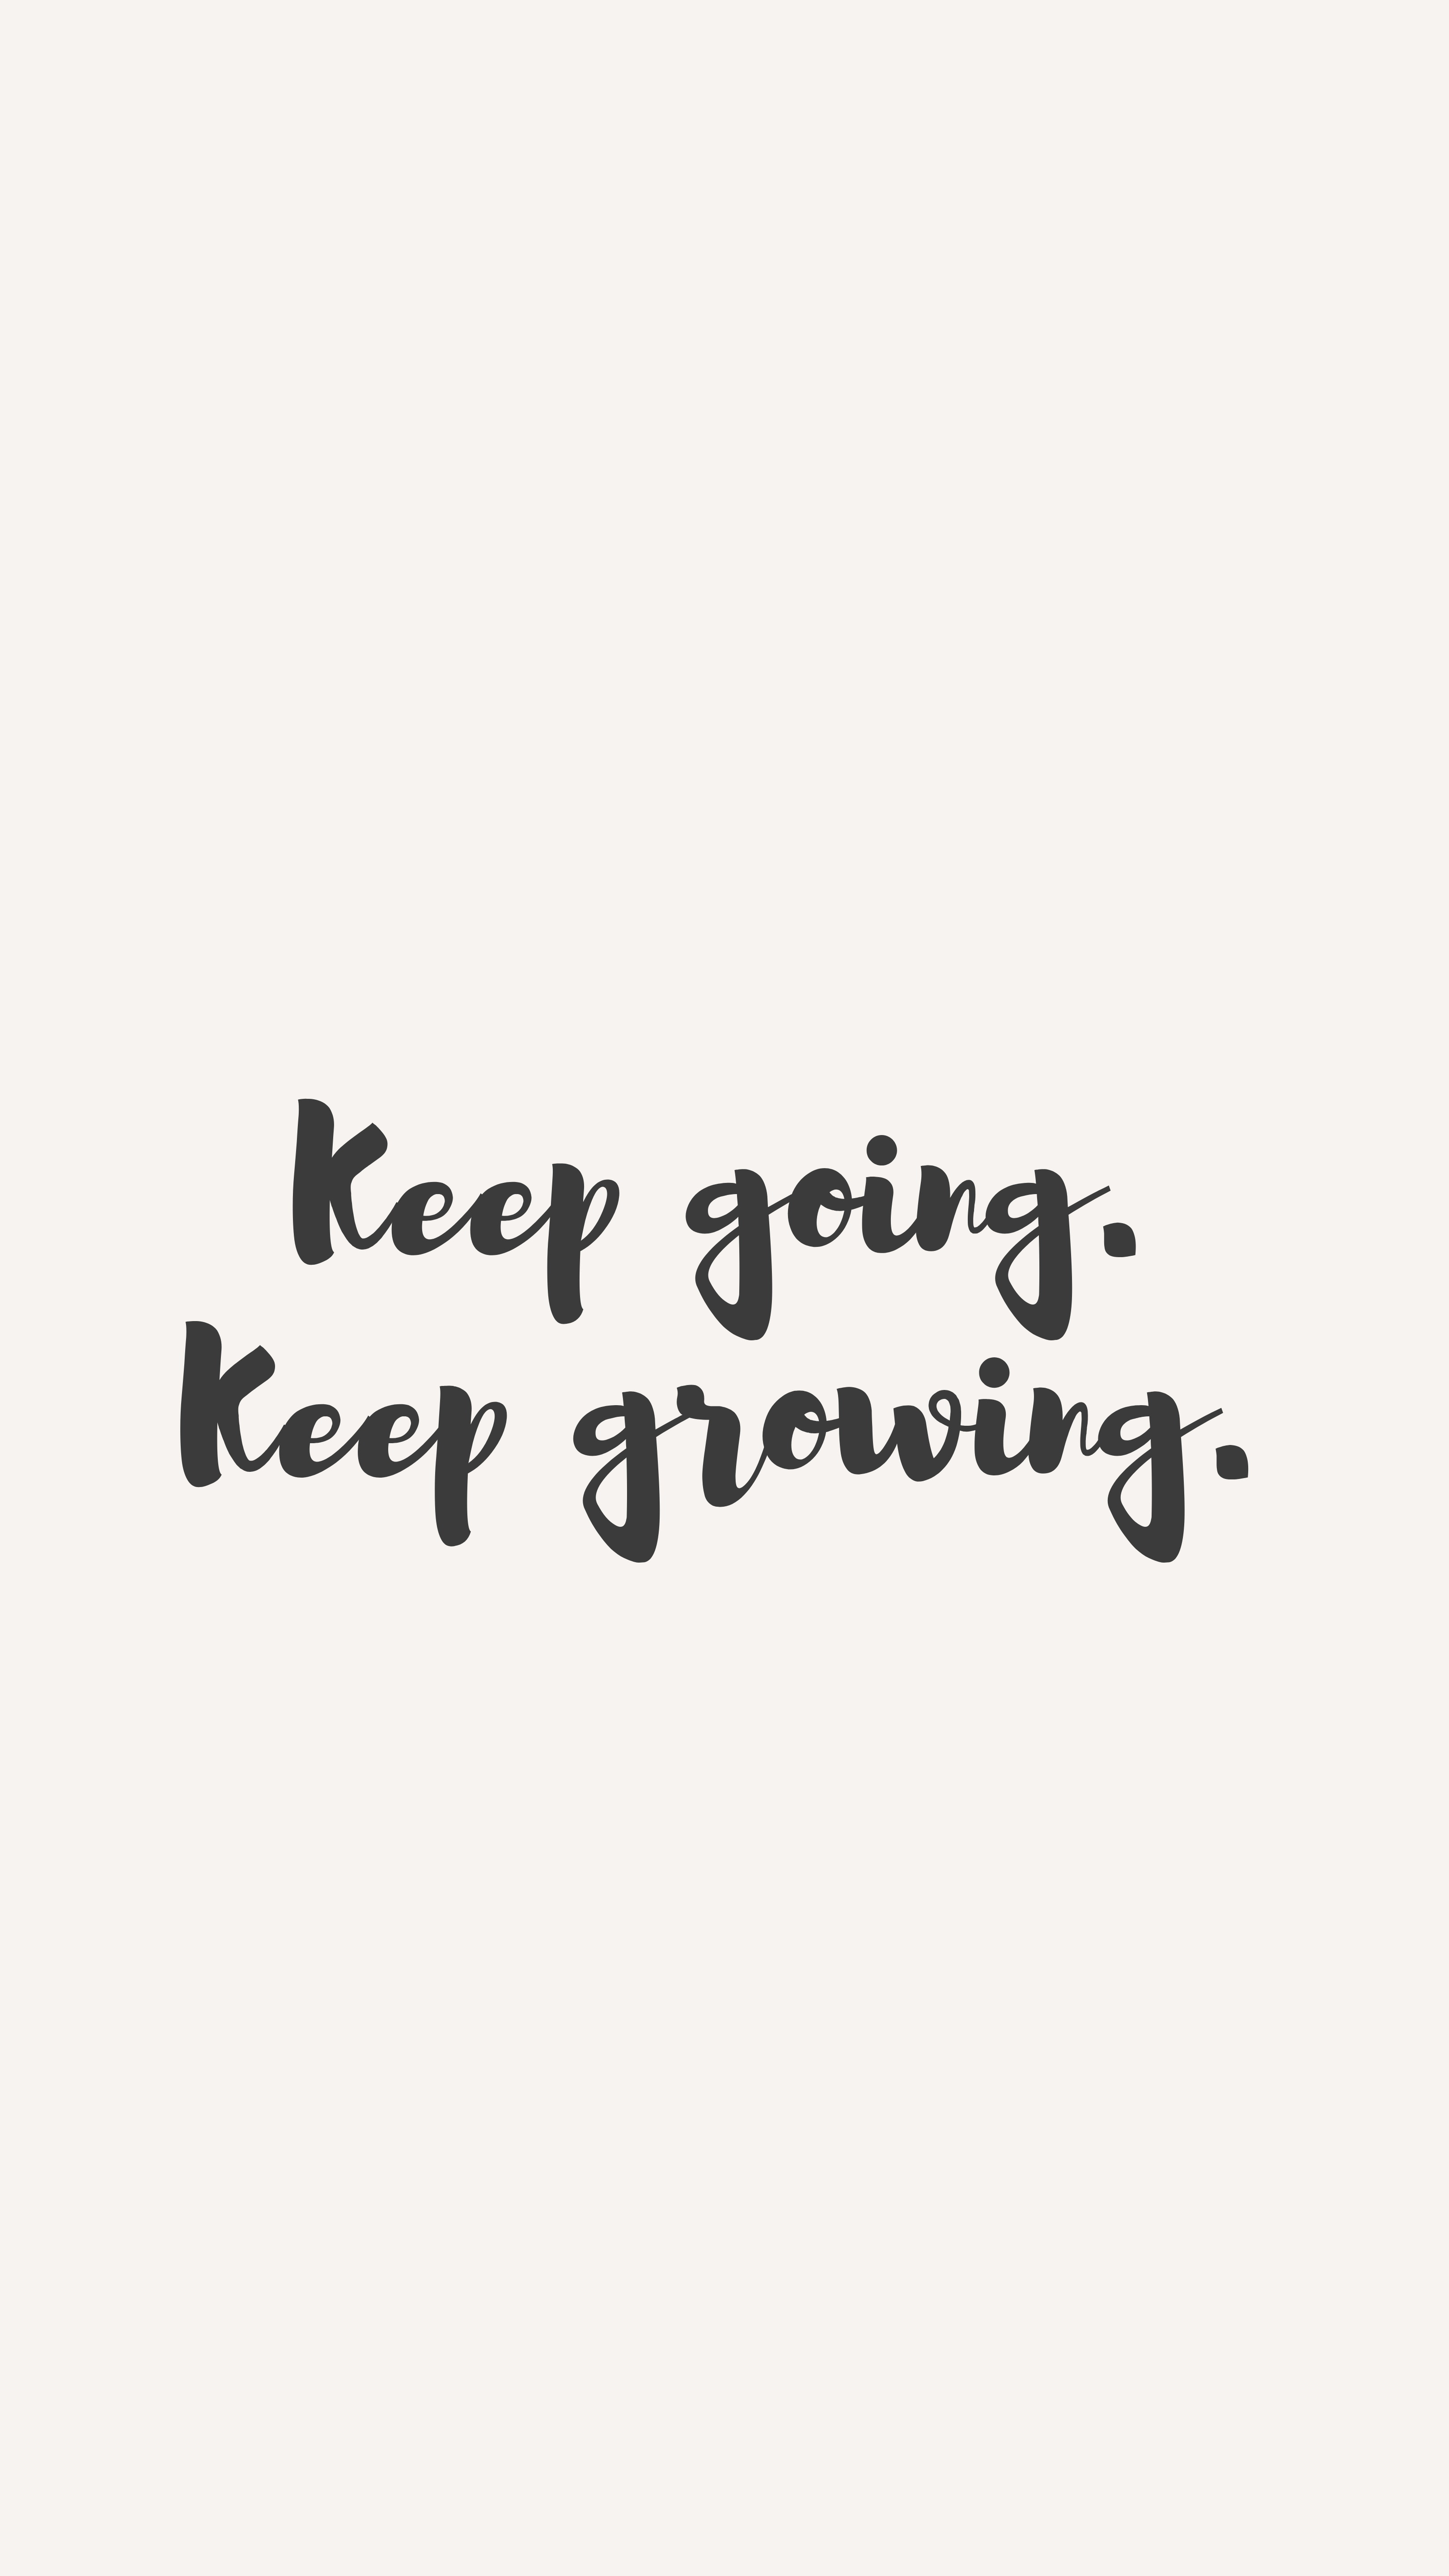 motivation, growth, words, traffic, movement, height, phrase download HD wallpaper